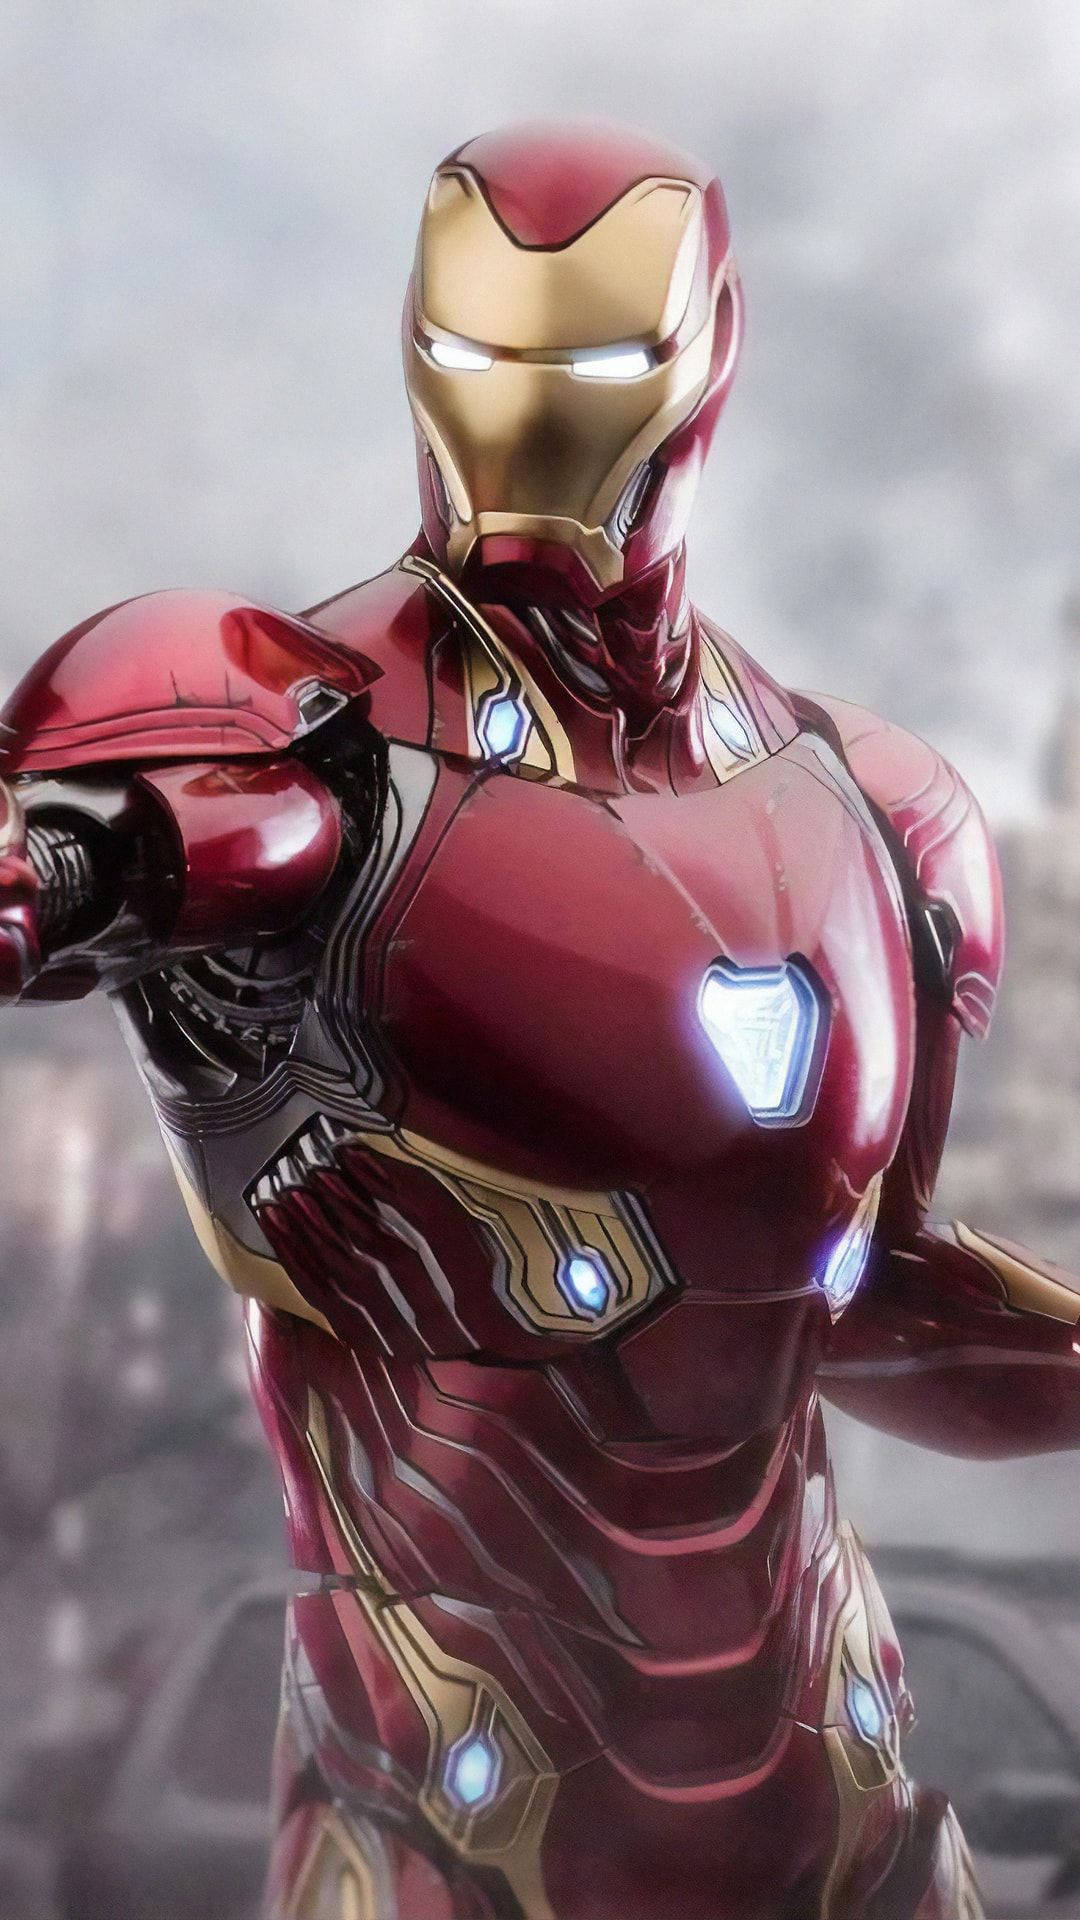 Body Of Iron Man Android